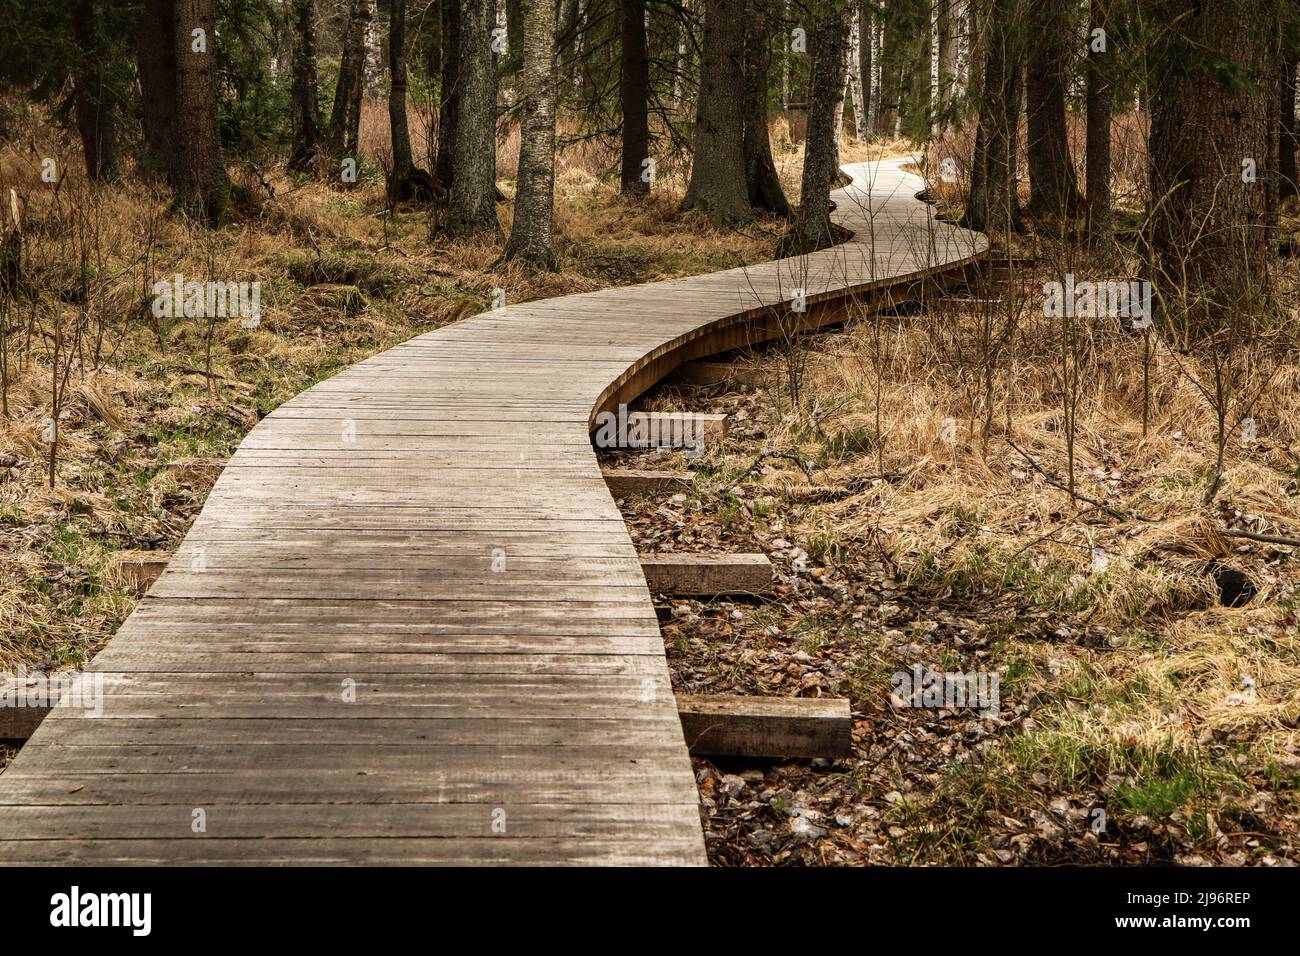 The protected area in Šumava national park in Czech Republic by the pond Olšina with its wooden pathways. Stock Photo